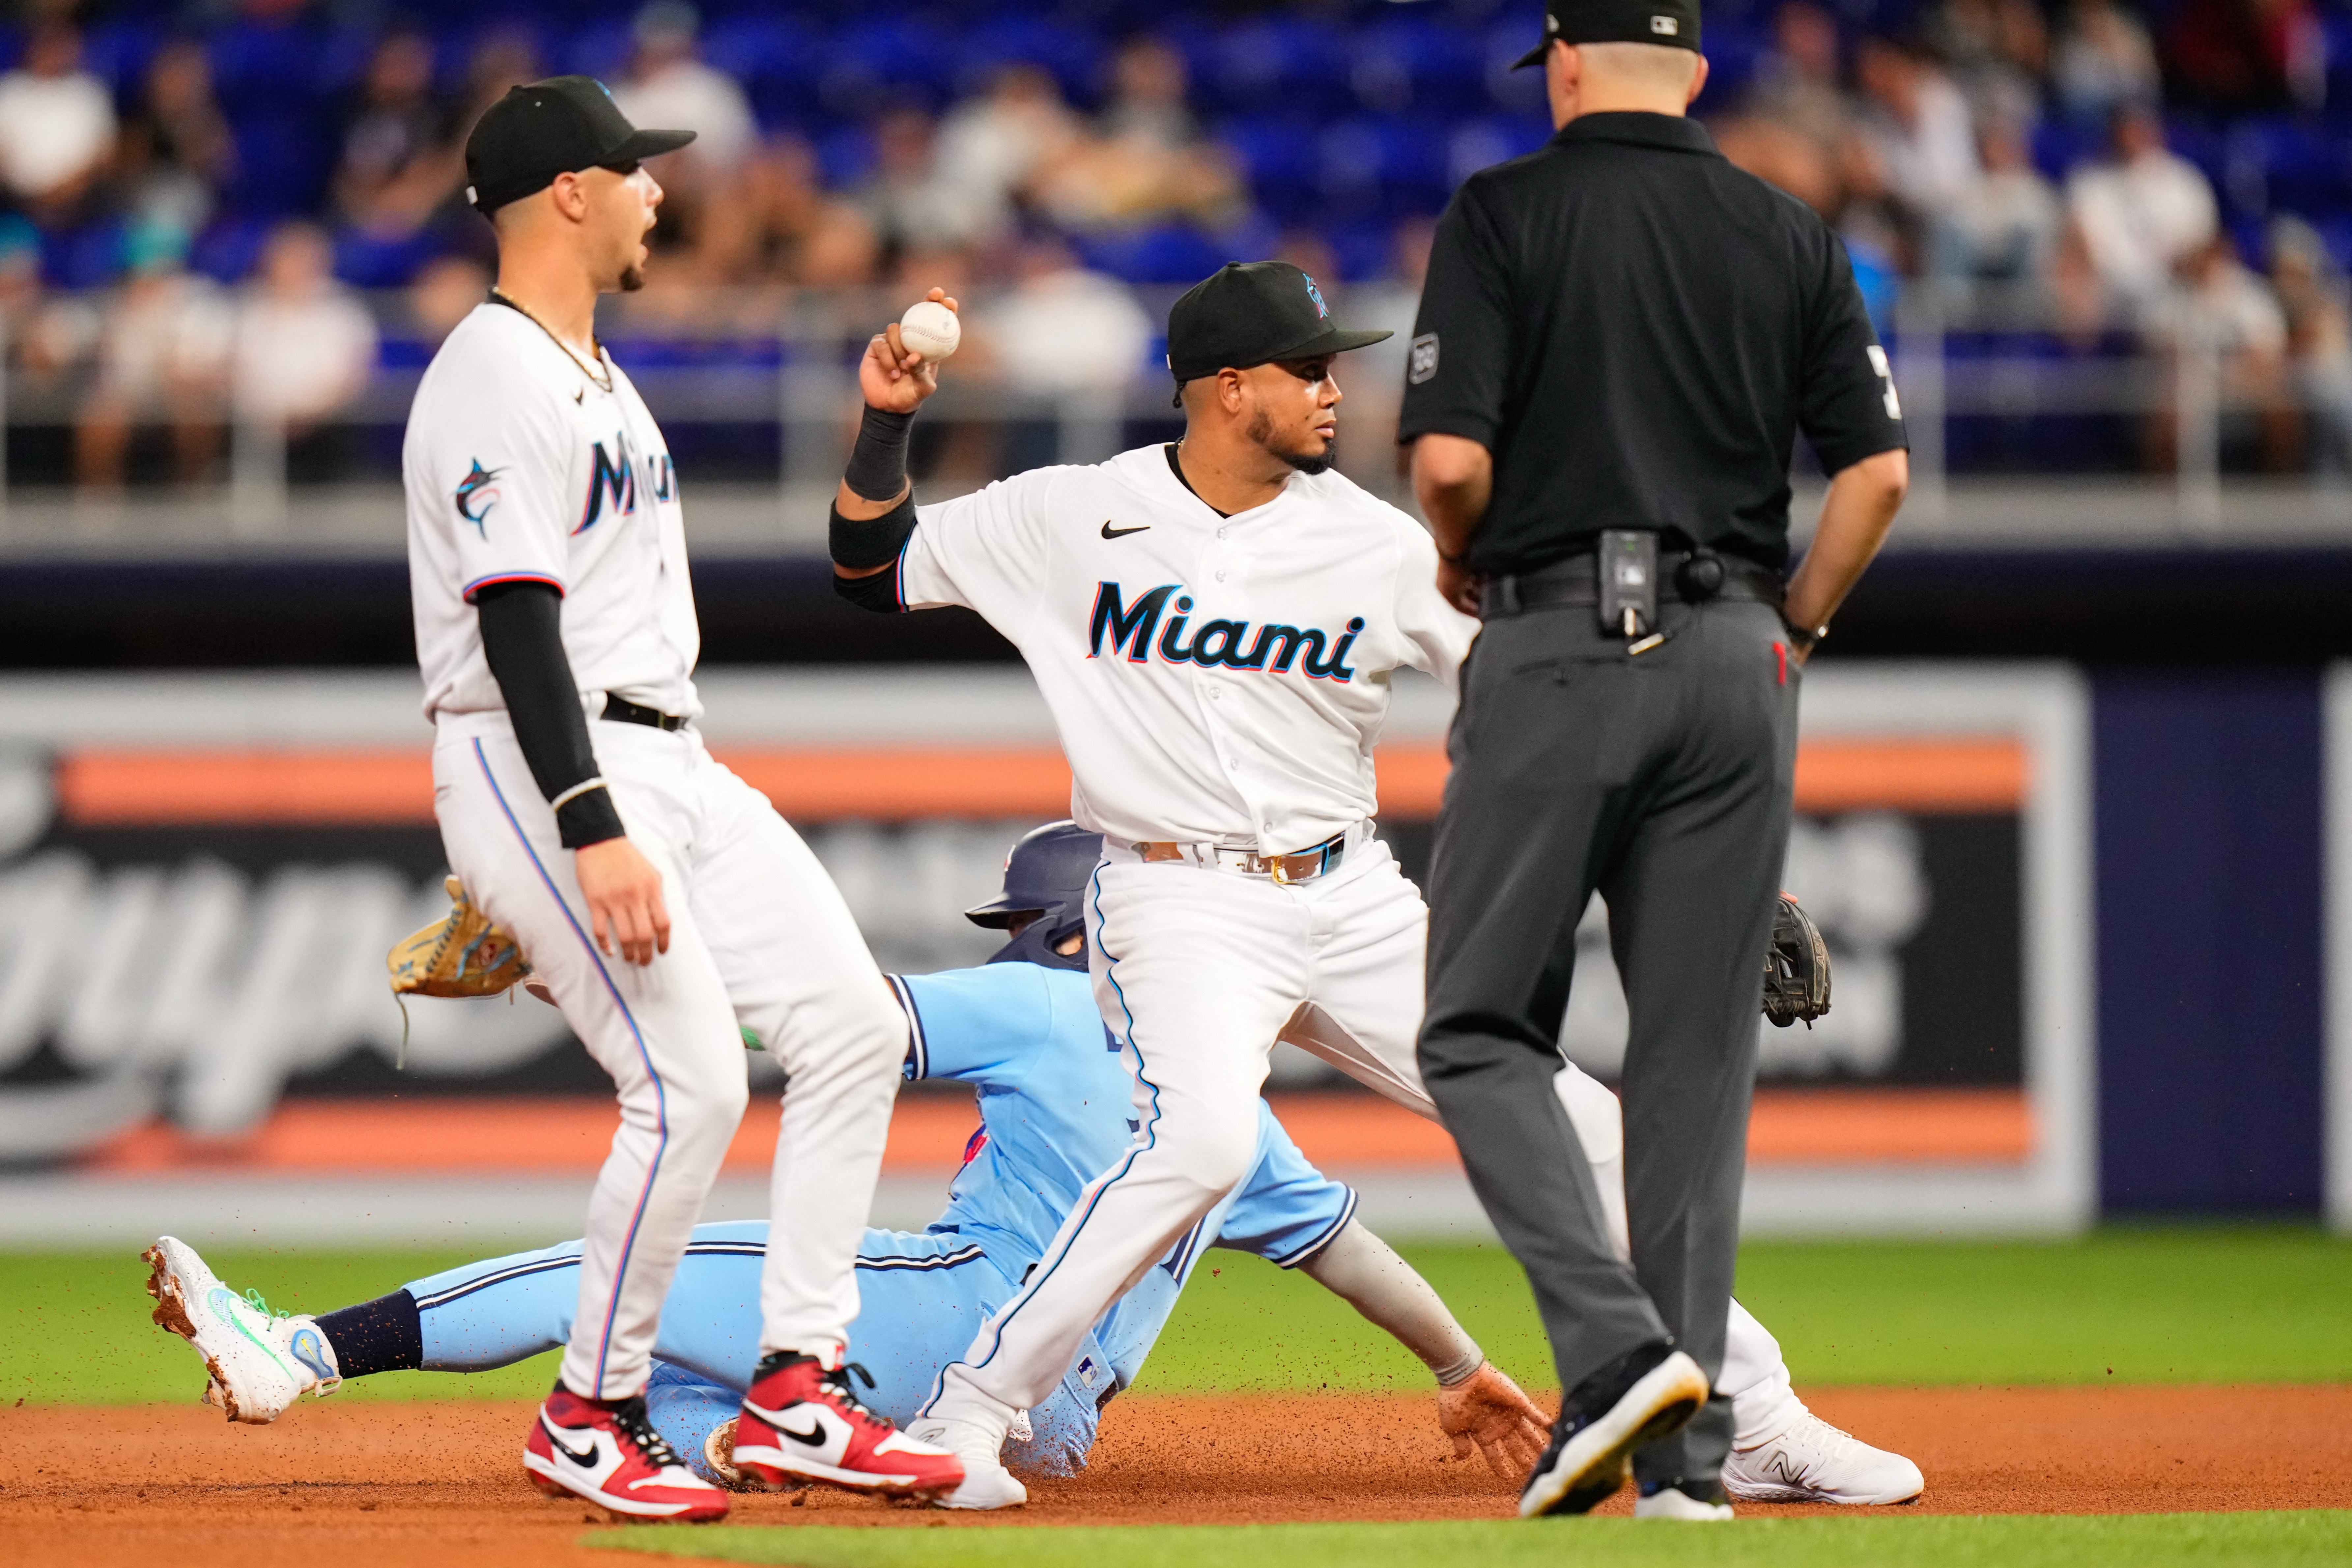 Miami Marlins reveal new uniforms for 2019